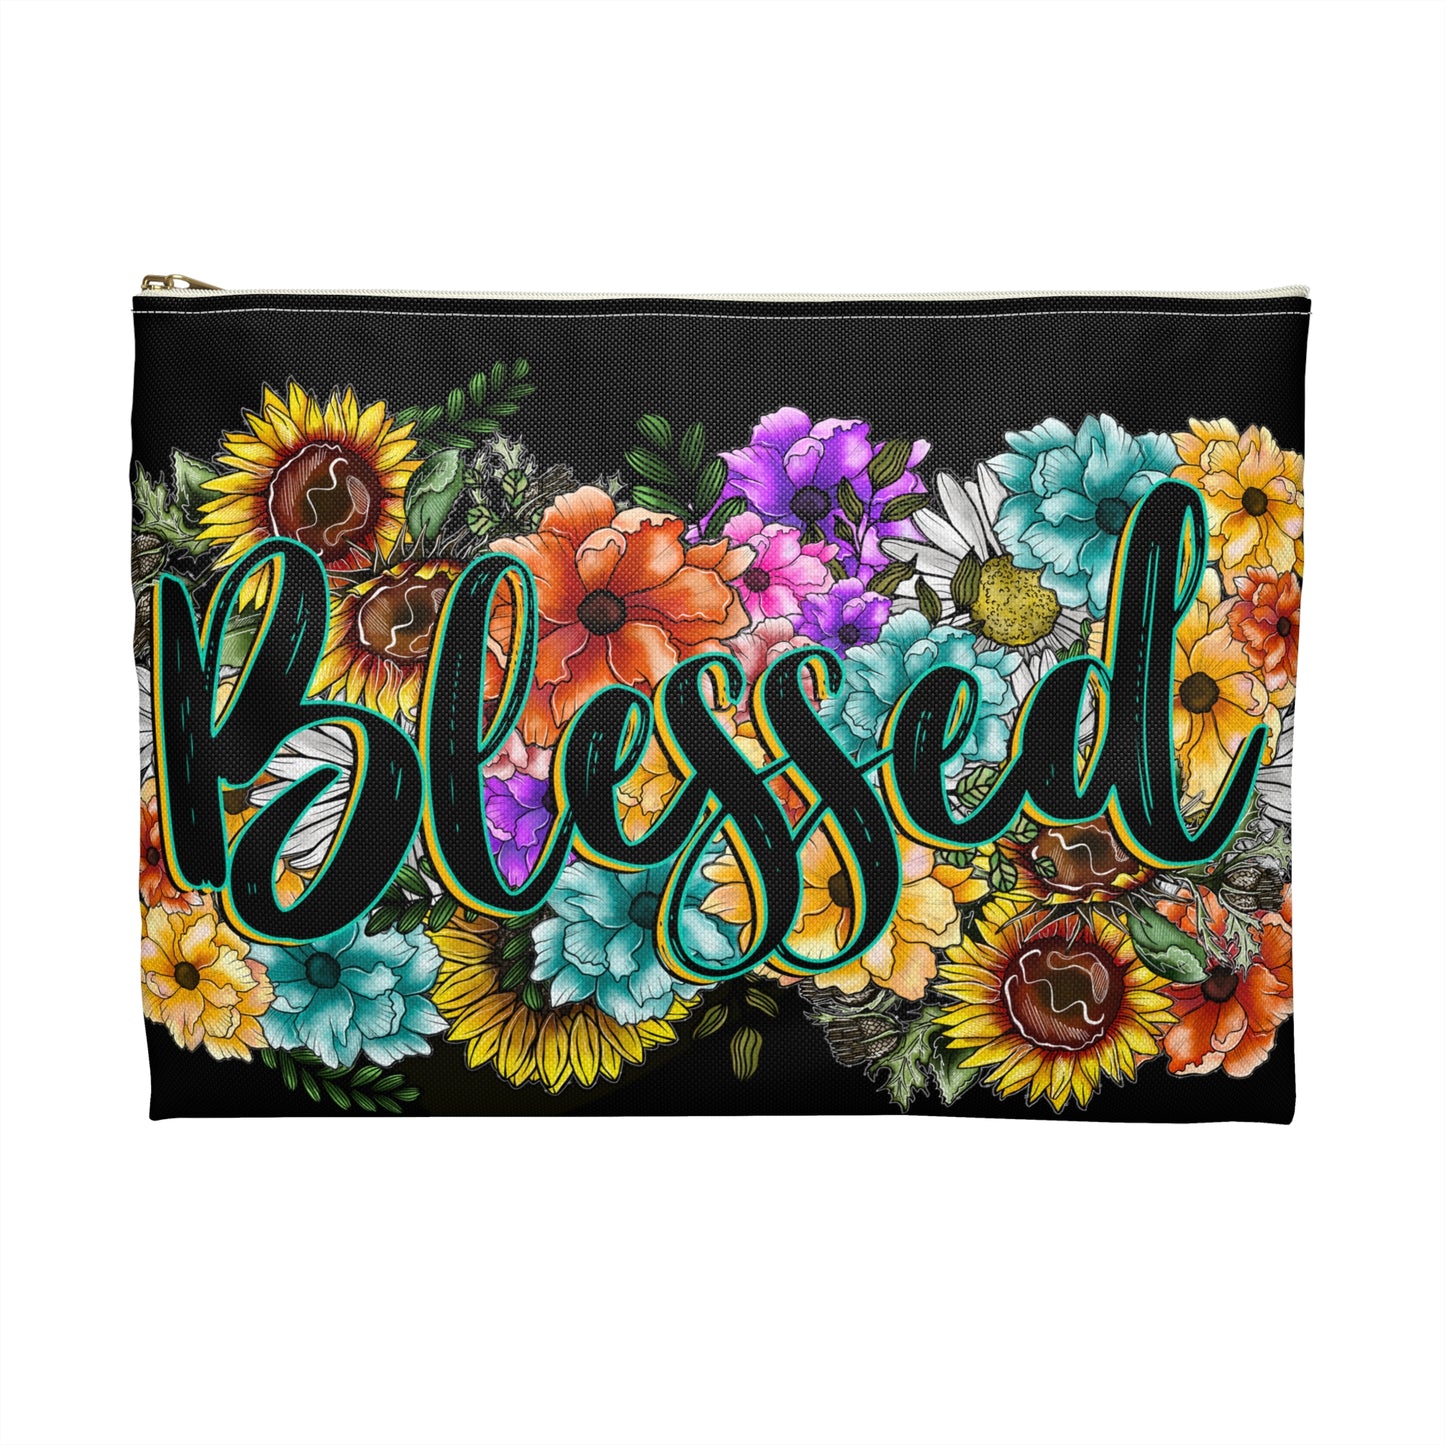 Makeup Bag Blessed Bag Accessory Pouch